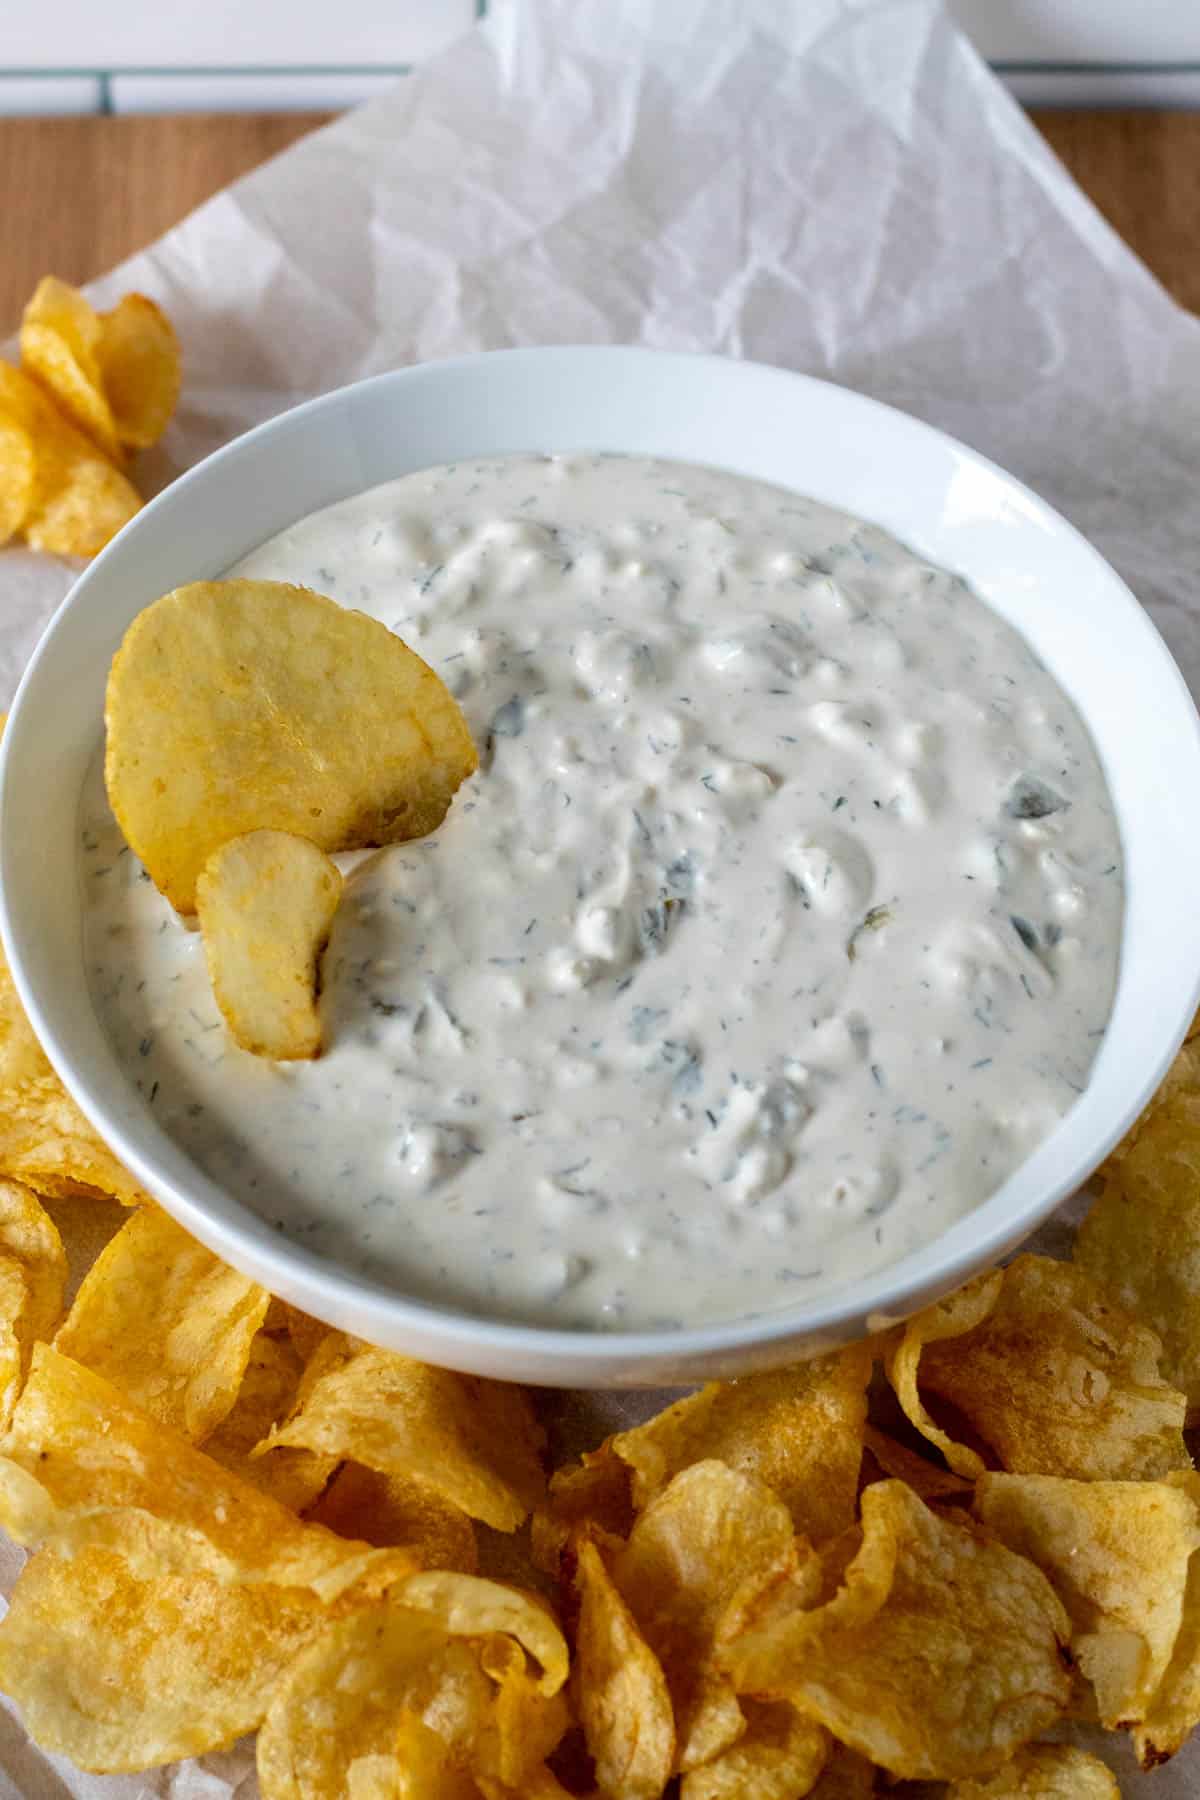 Dill pickle dip in a serving bowl with two chips inseted on the side, bowl surrounded by potato chips.